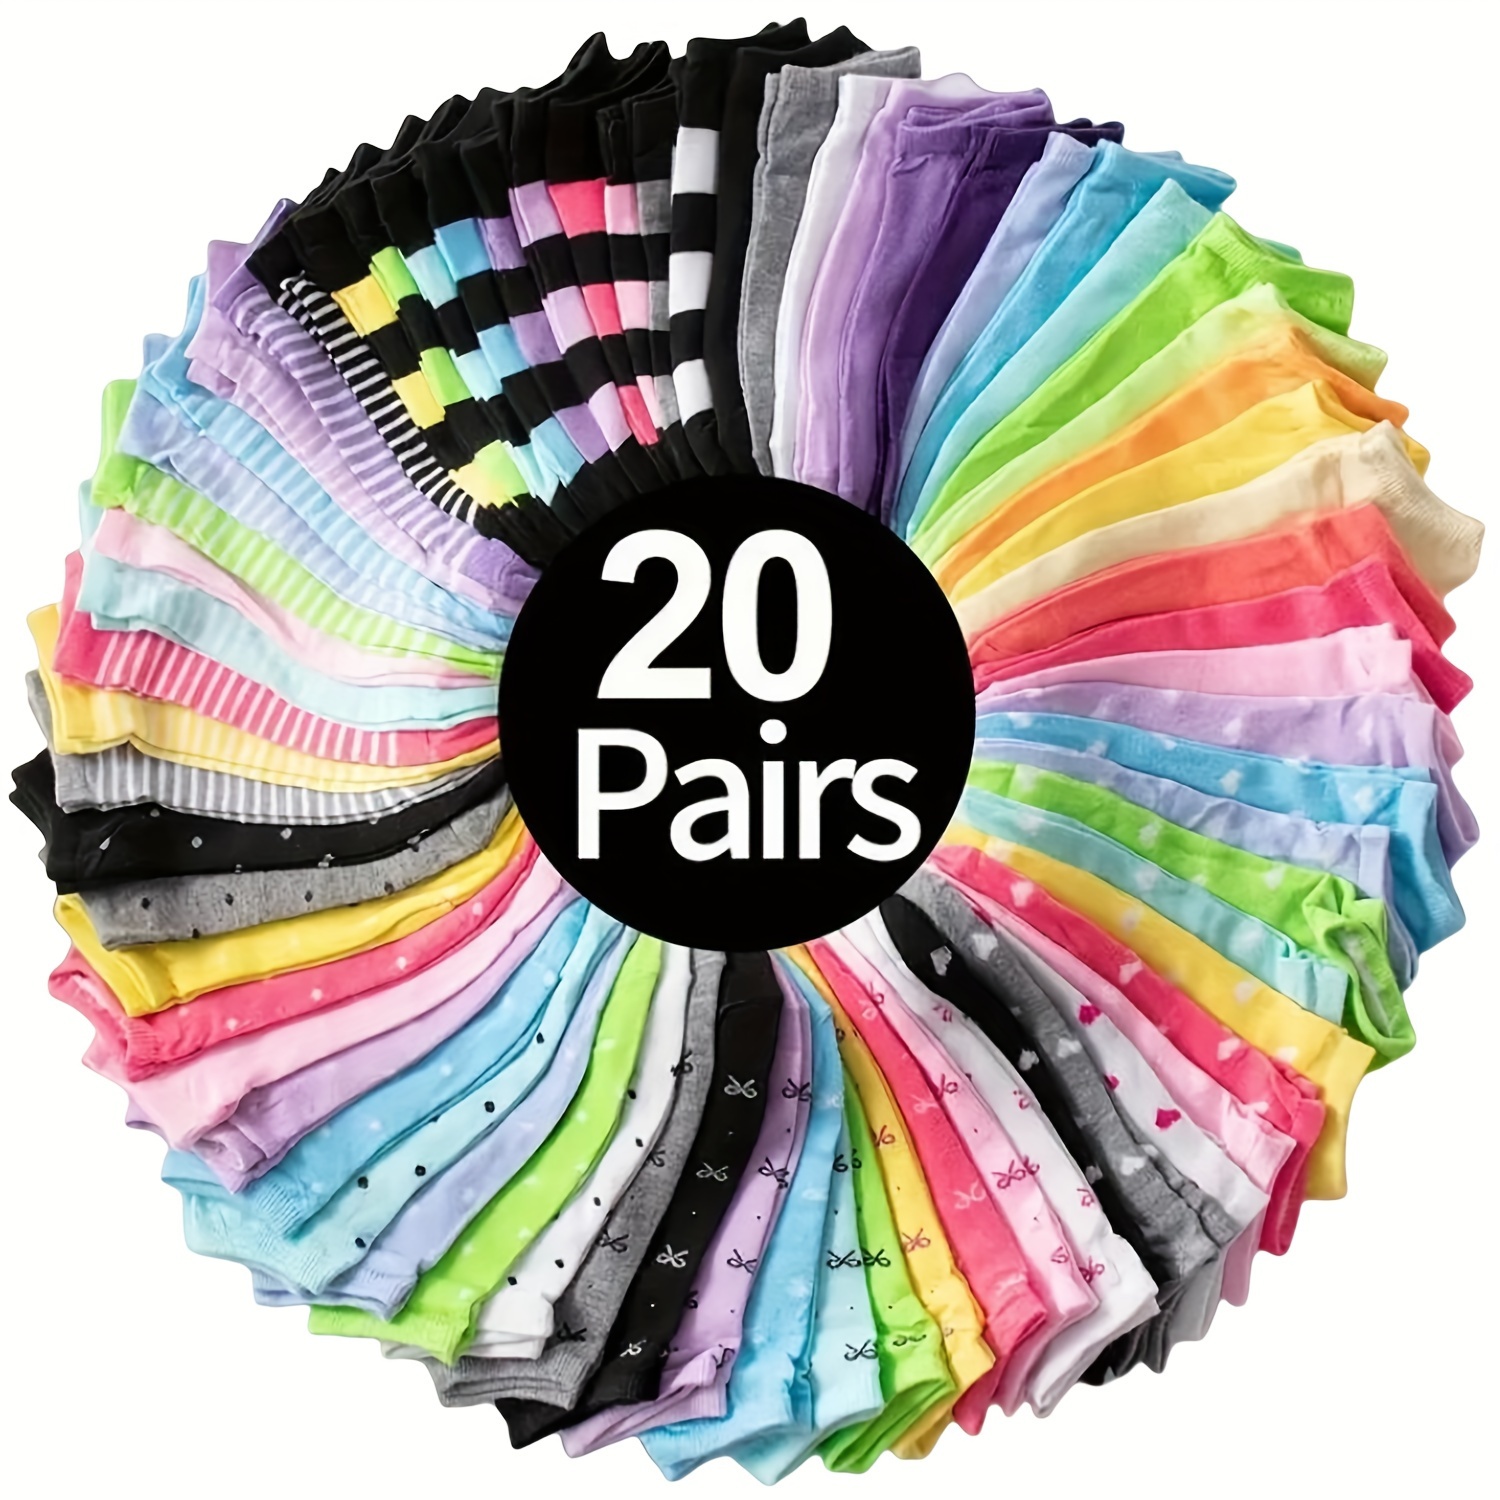 

20 Pairs Of Teenager's Fashion Cute Pattern Low-cut Socks, Comfy & Breathable Soft & Elastic Thin Socks For Spring And Summer